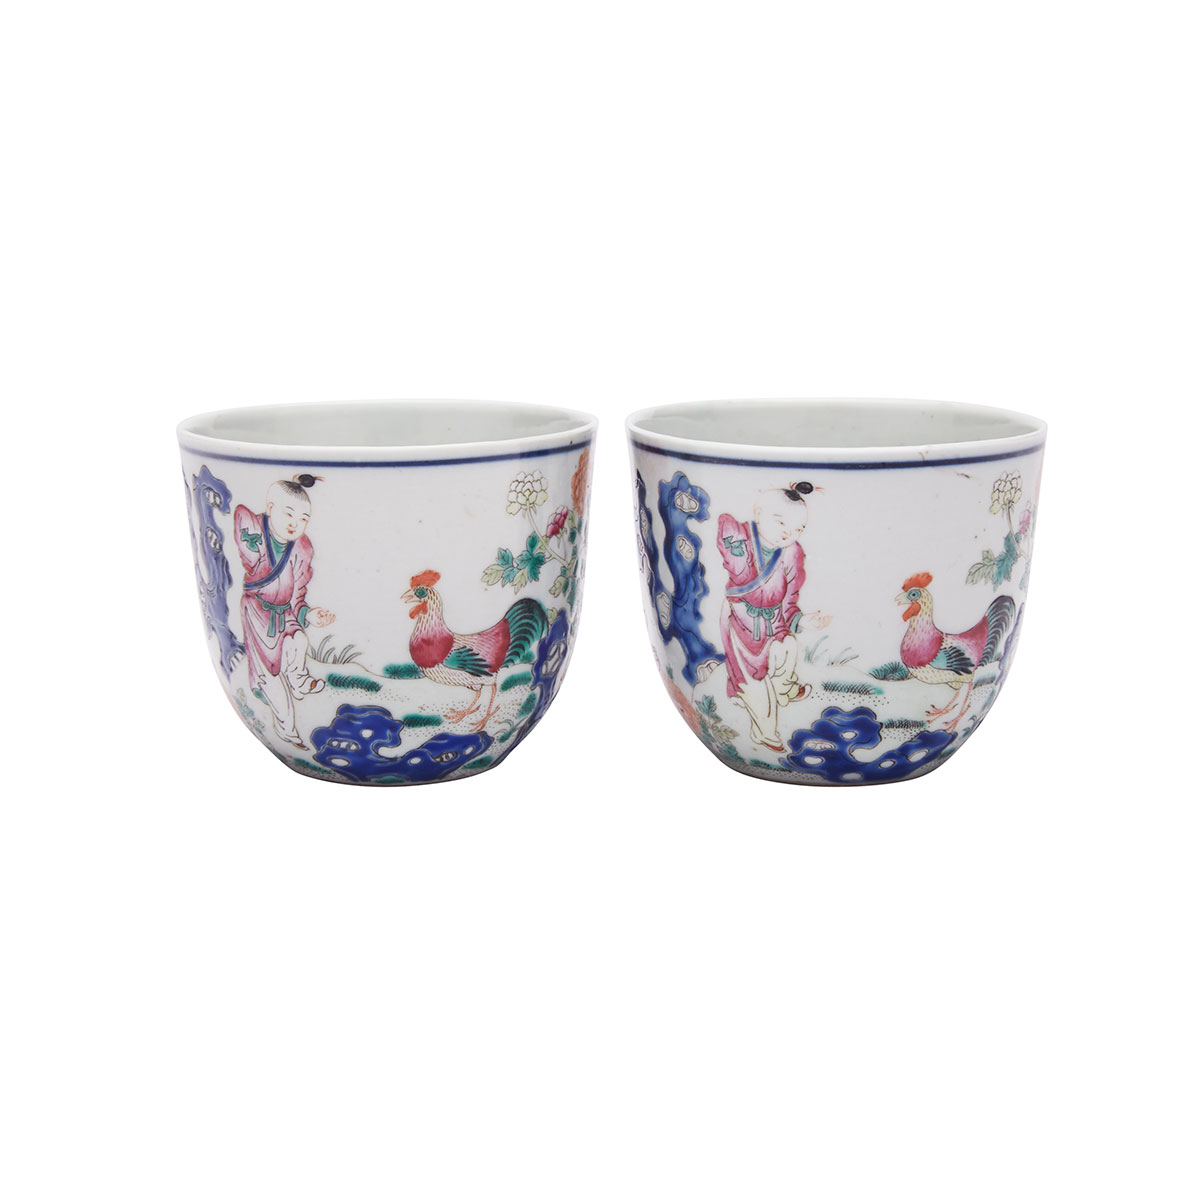 Pair of Famille Rose Chicken Cups, Qianlong Mark, Republican Period